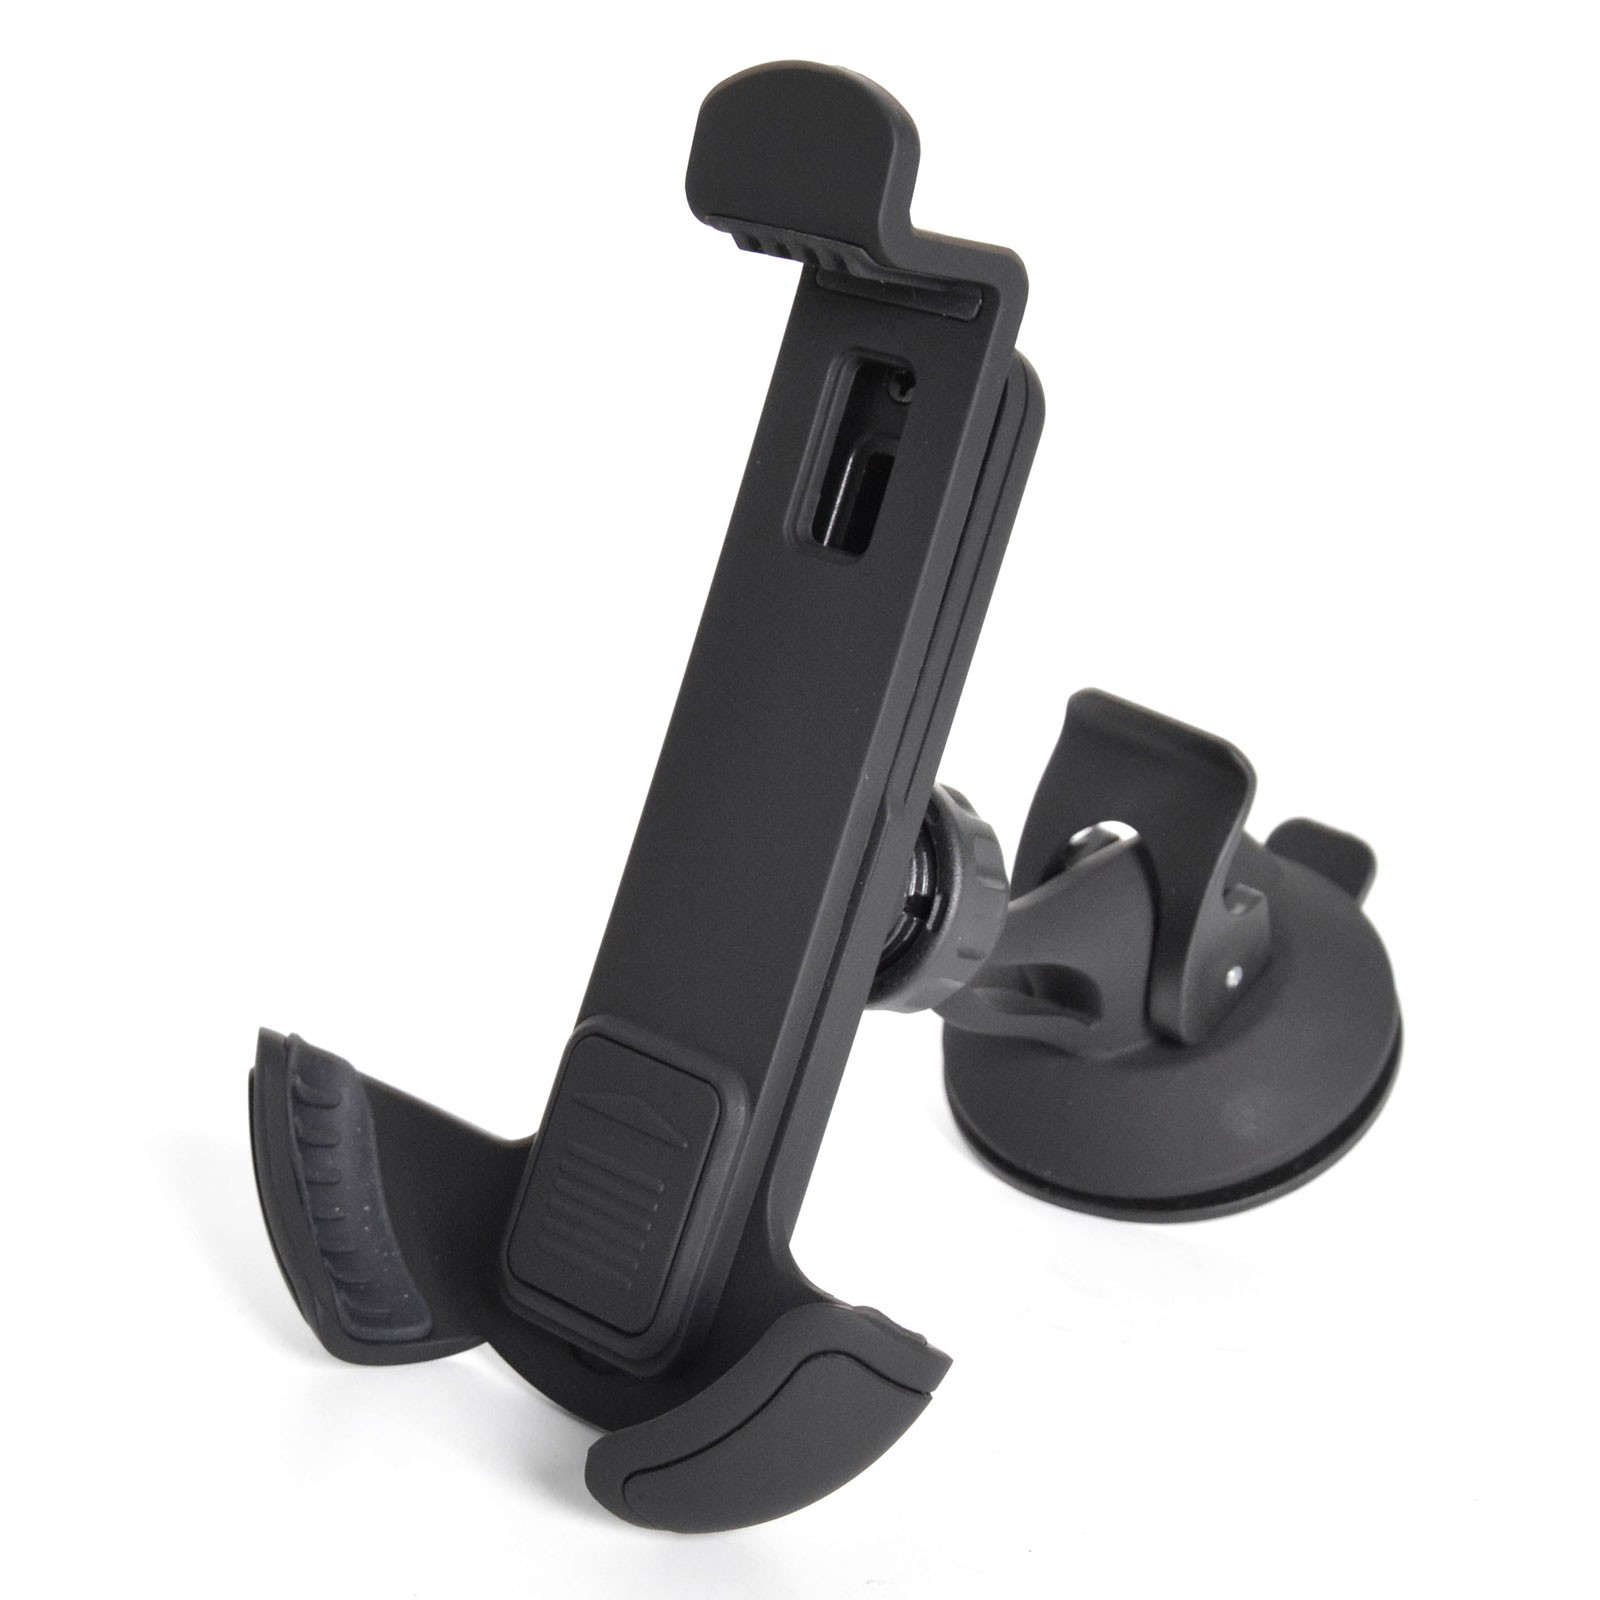 Unisynk support voiture pour iPhone et smartphone (pare-brise) - Support -  Unisynk